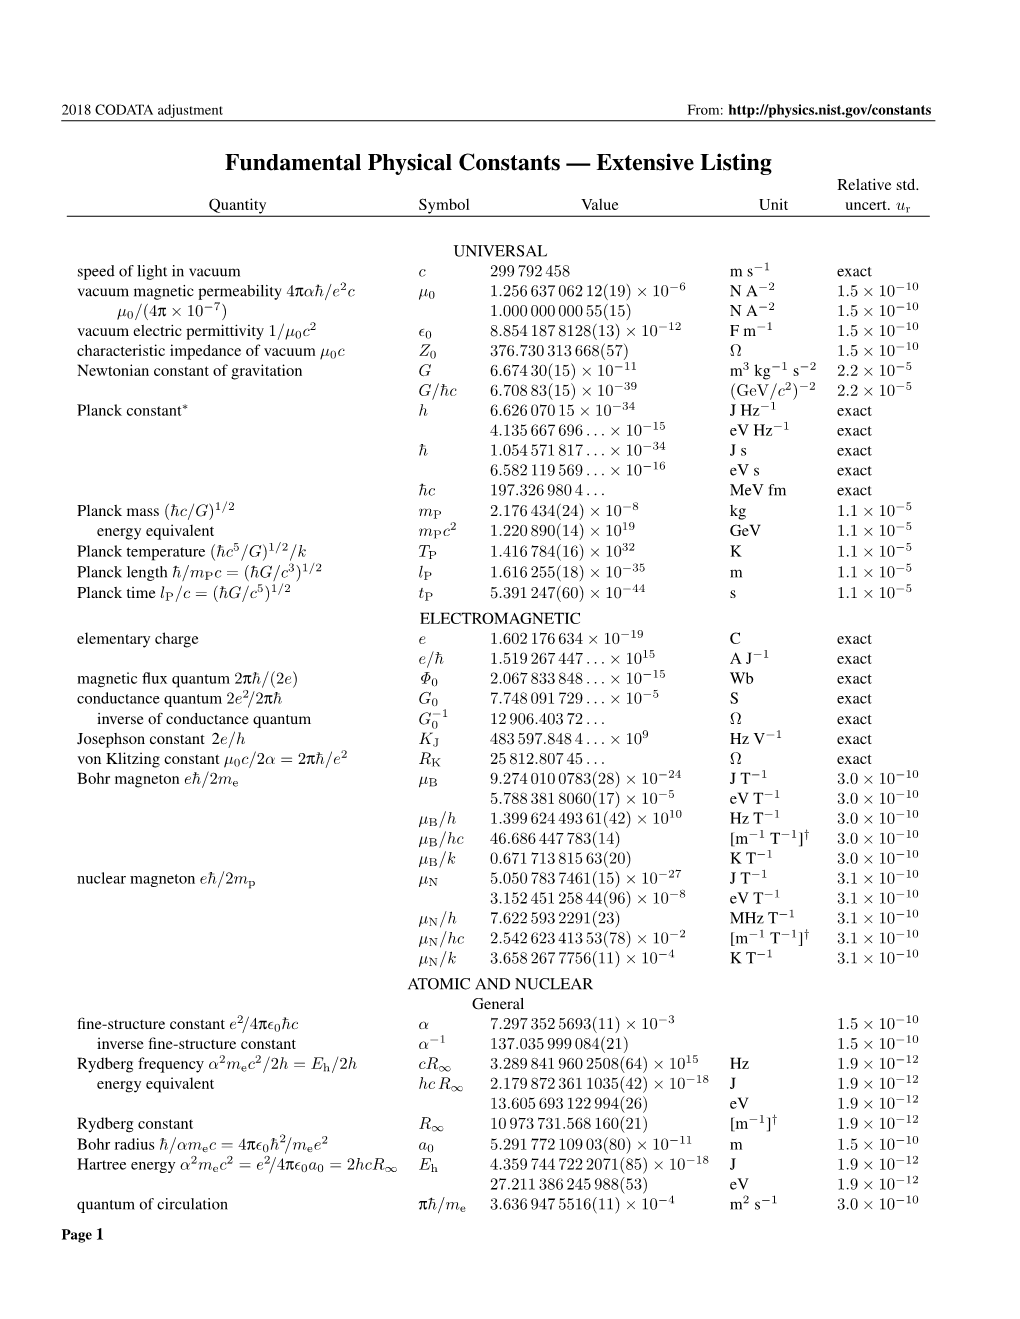 Fundamental Physical Constants — Extensive Listing Relative Std